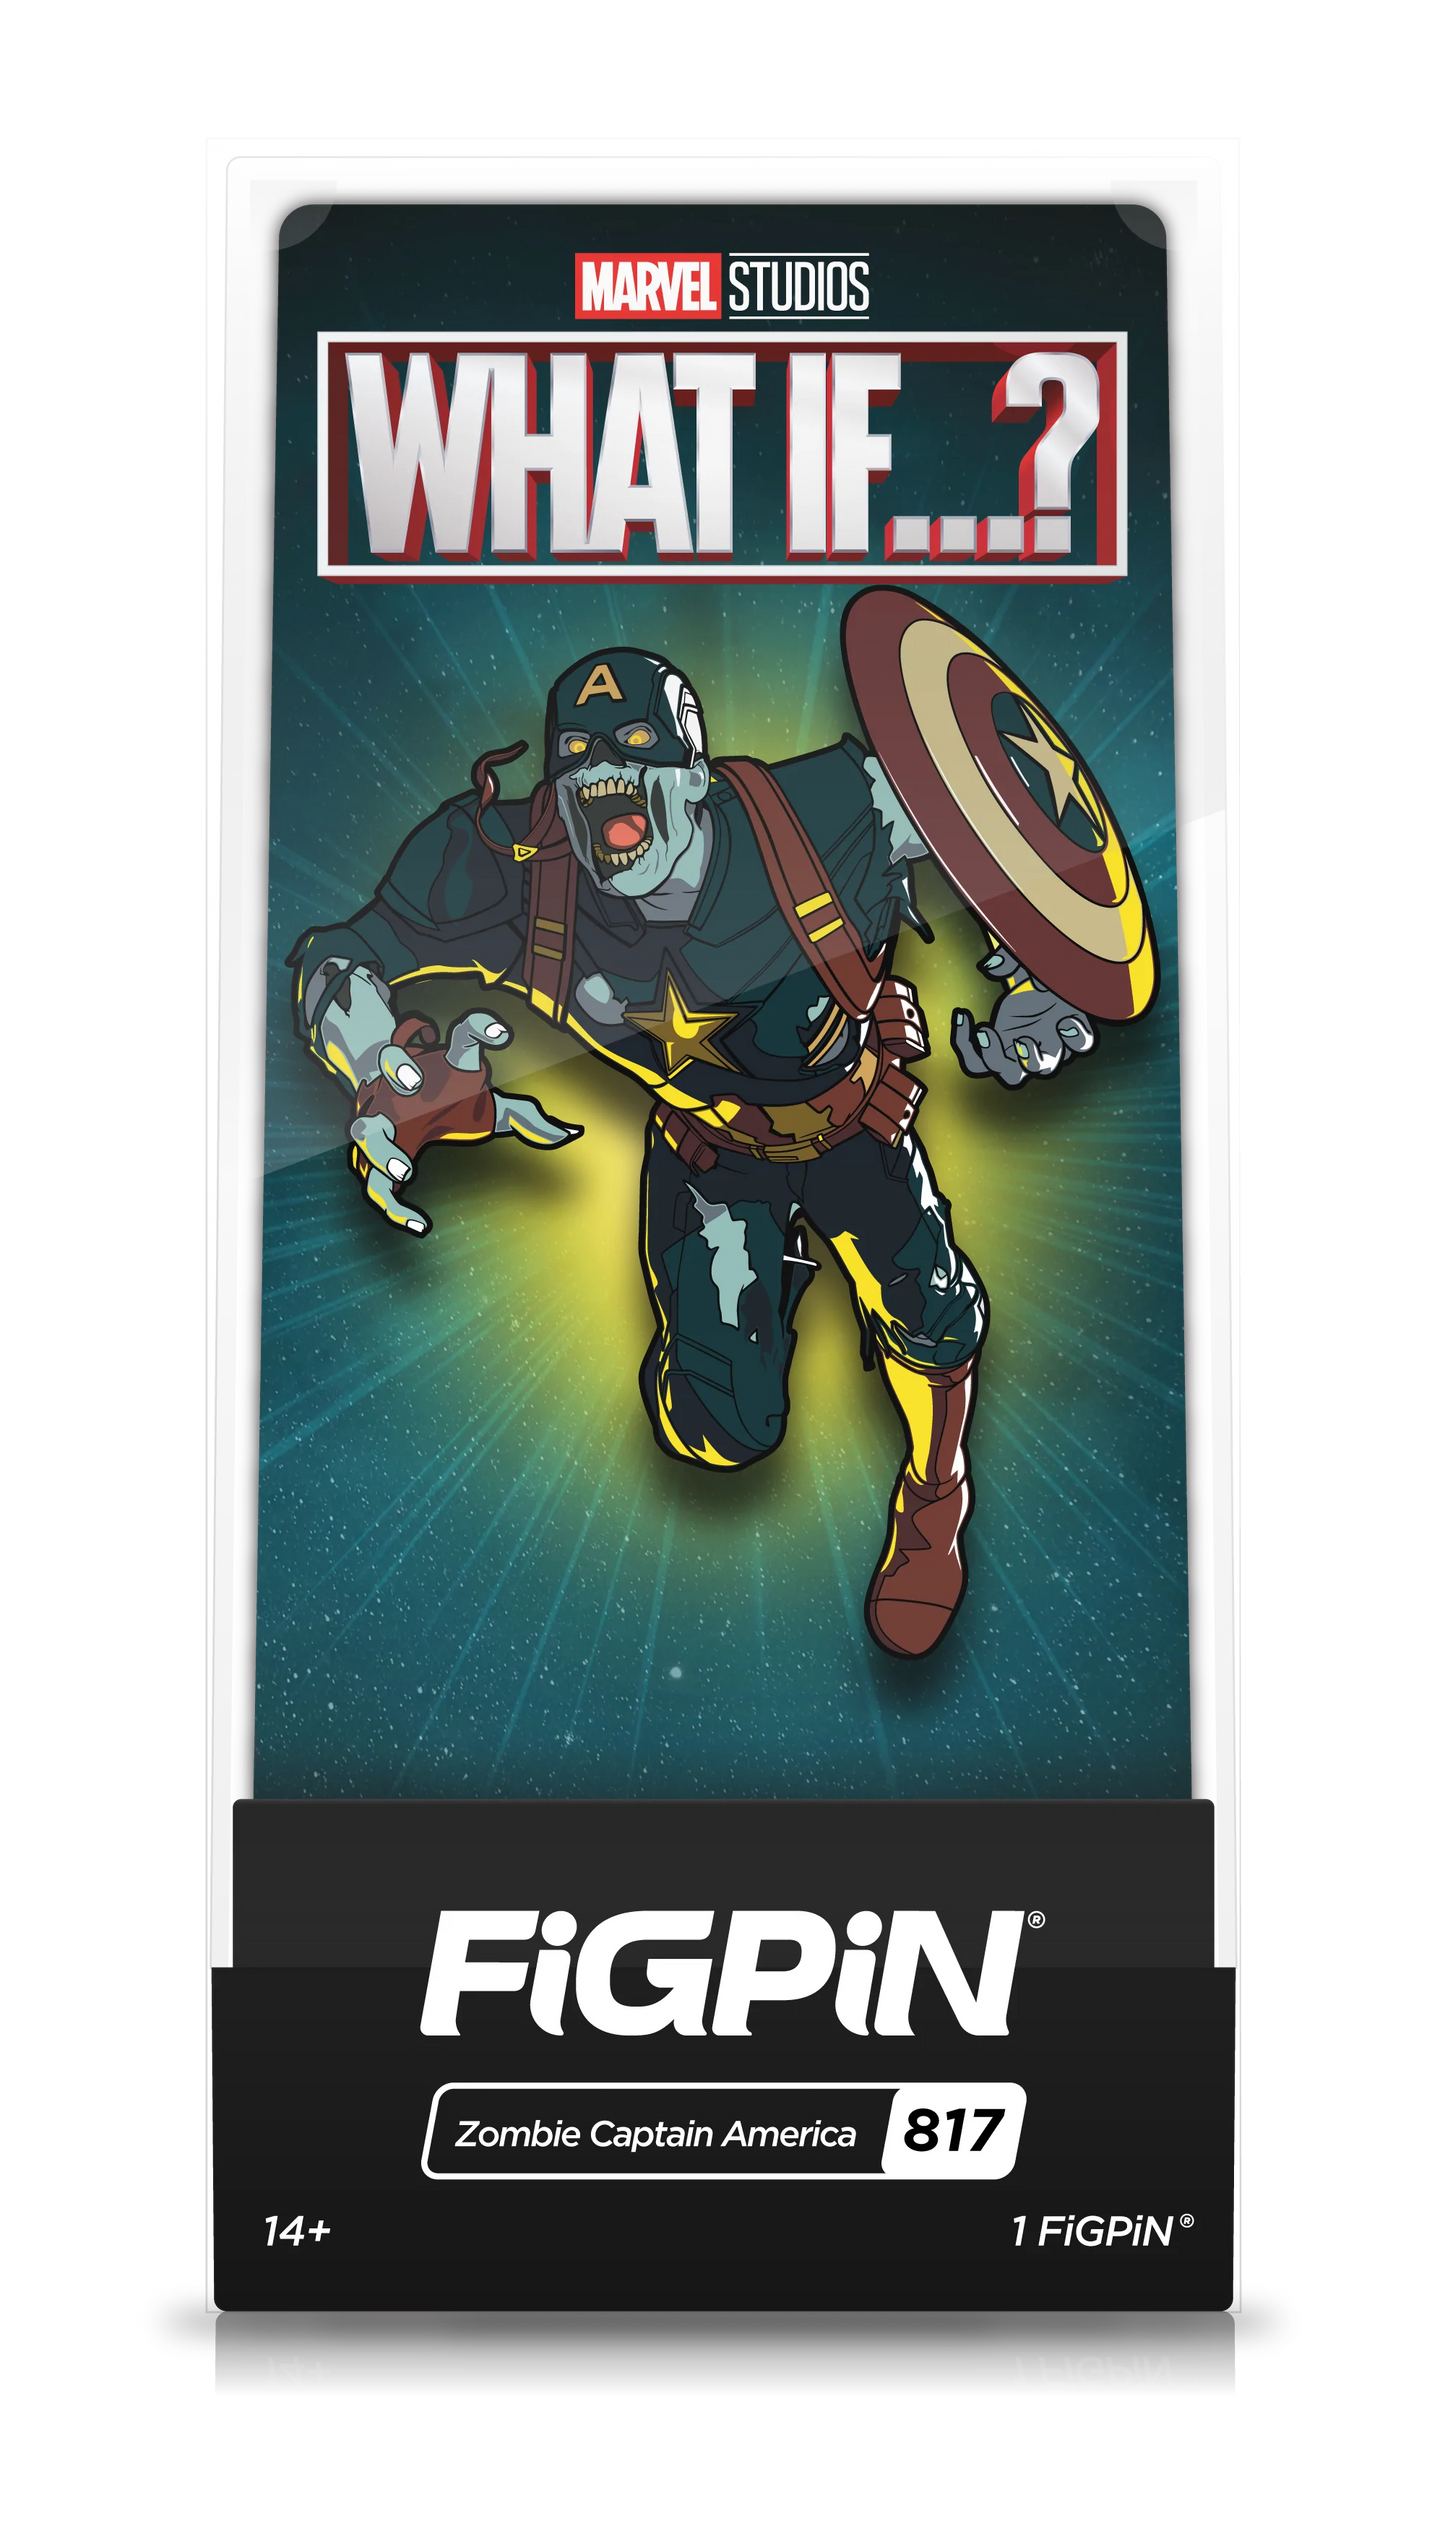 FiGPiN Zombie Captain America (817) Property: What If...?